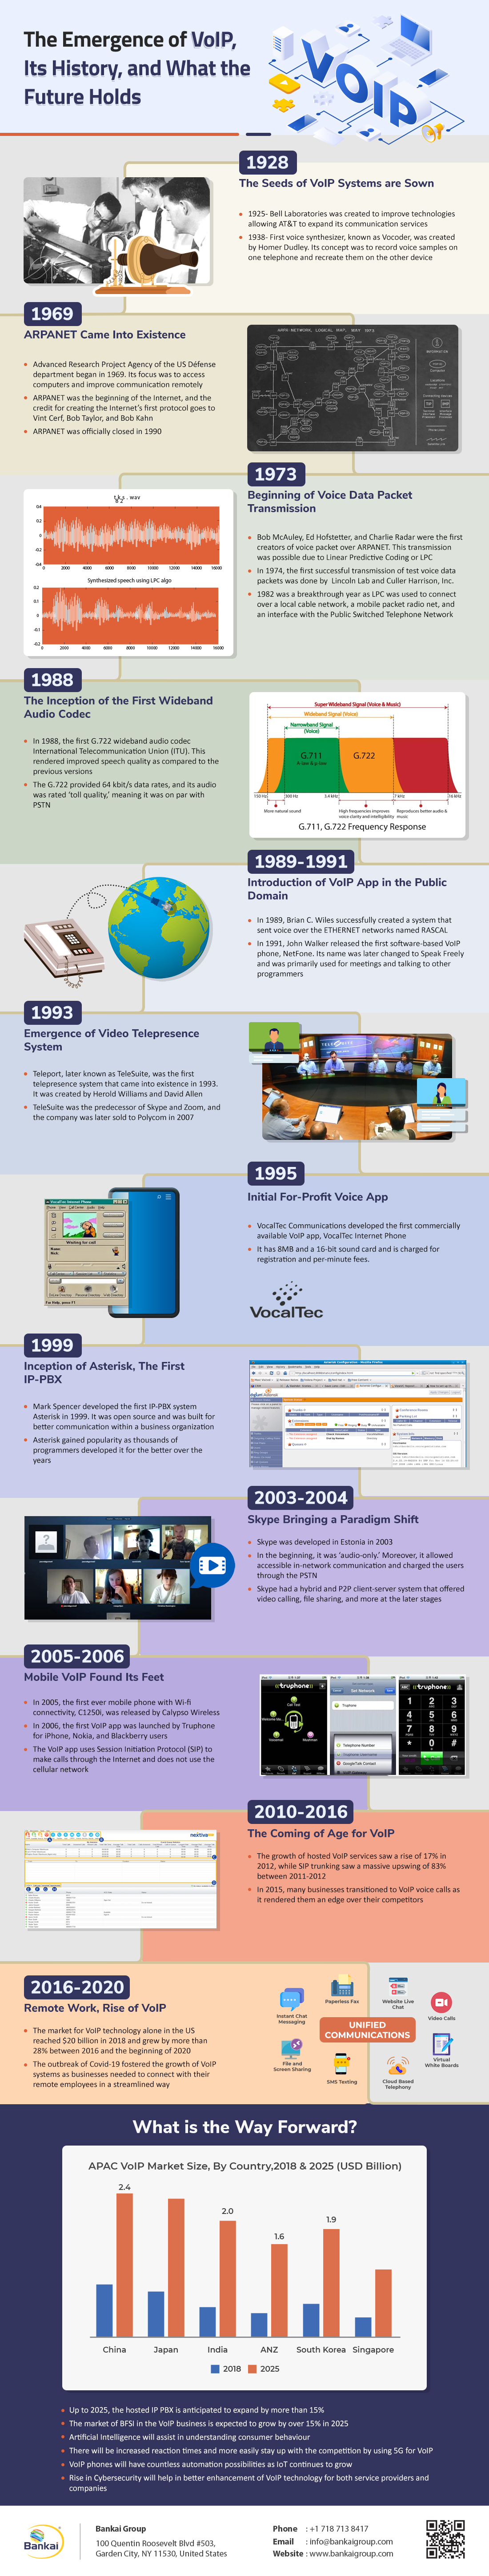 The Inception and Expansion of VoIP Through the Years